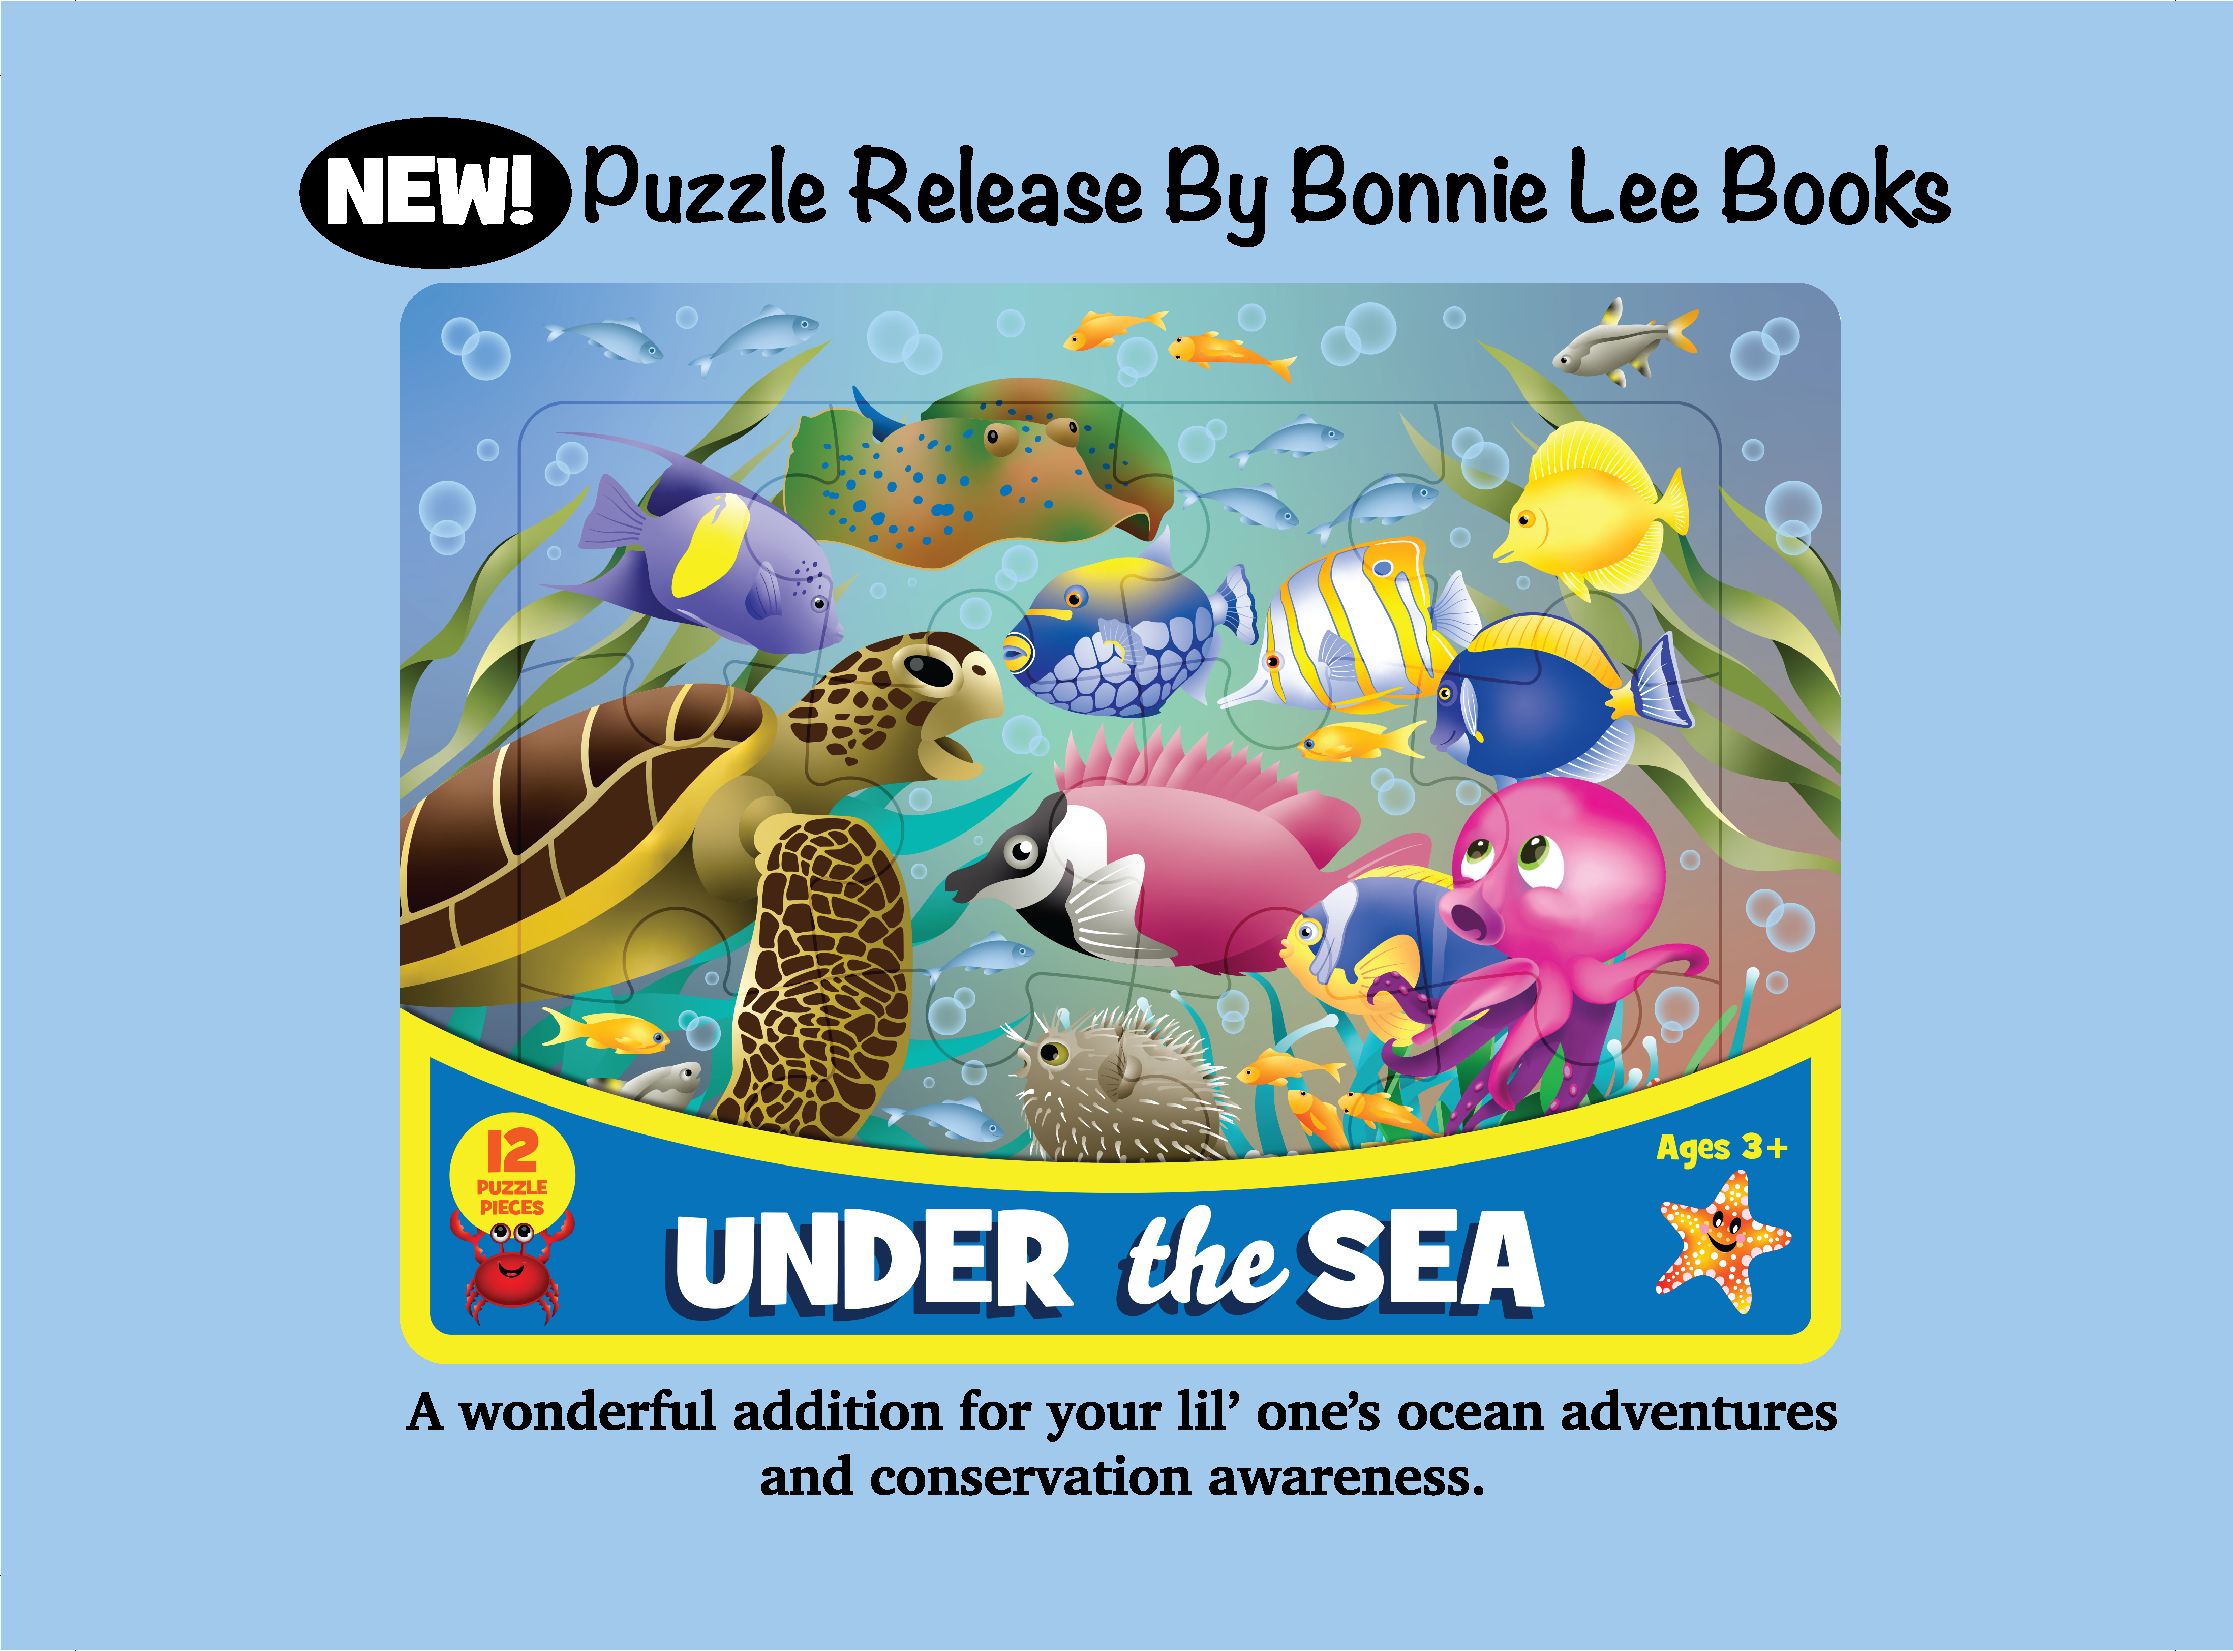 Bonnie Lee Books. Educational Children's Stories. An author with a whimsical flair for creating stories which introduce children to unique animals and their environments. Bonnie Lee Books teach children how to be open to new ideas, and get them to think and apply these experiences to their own life.